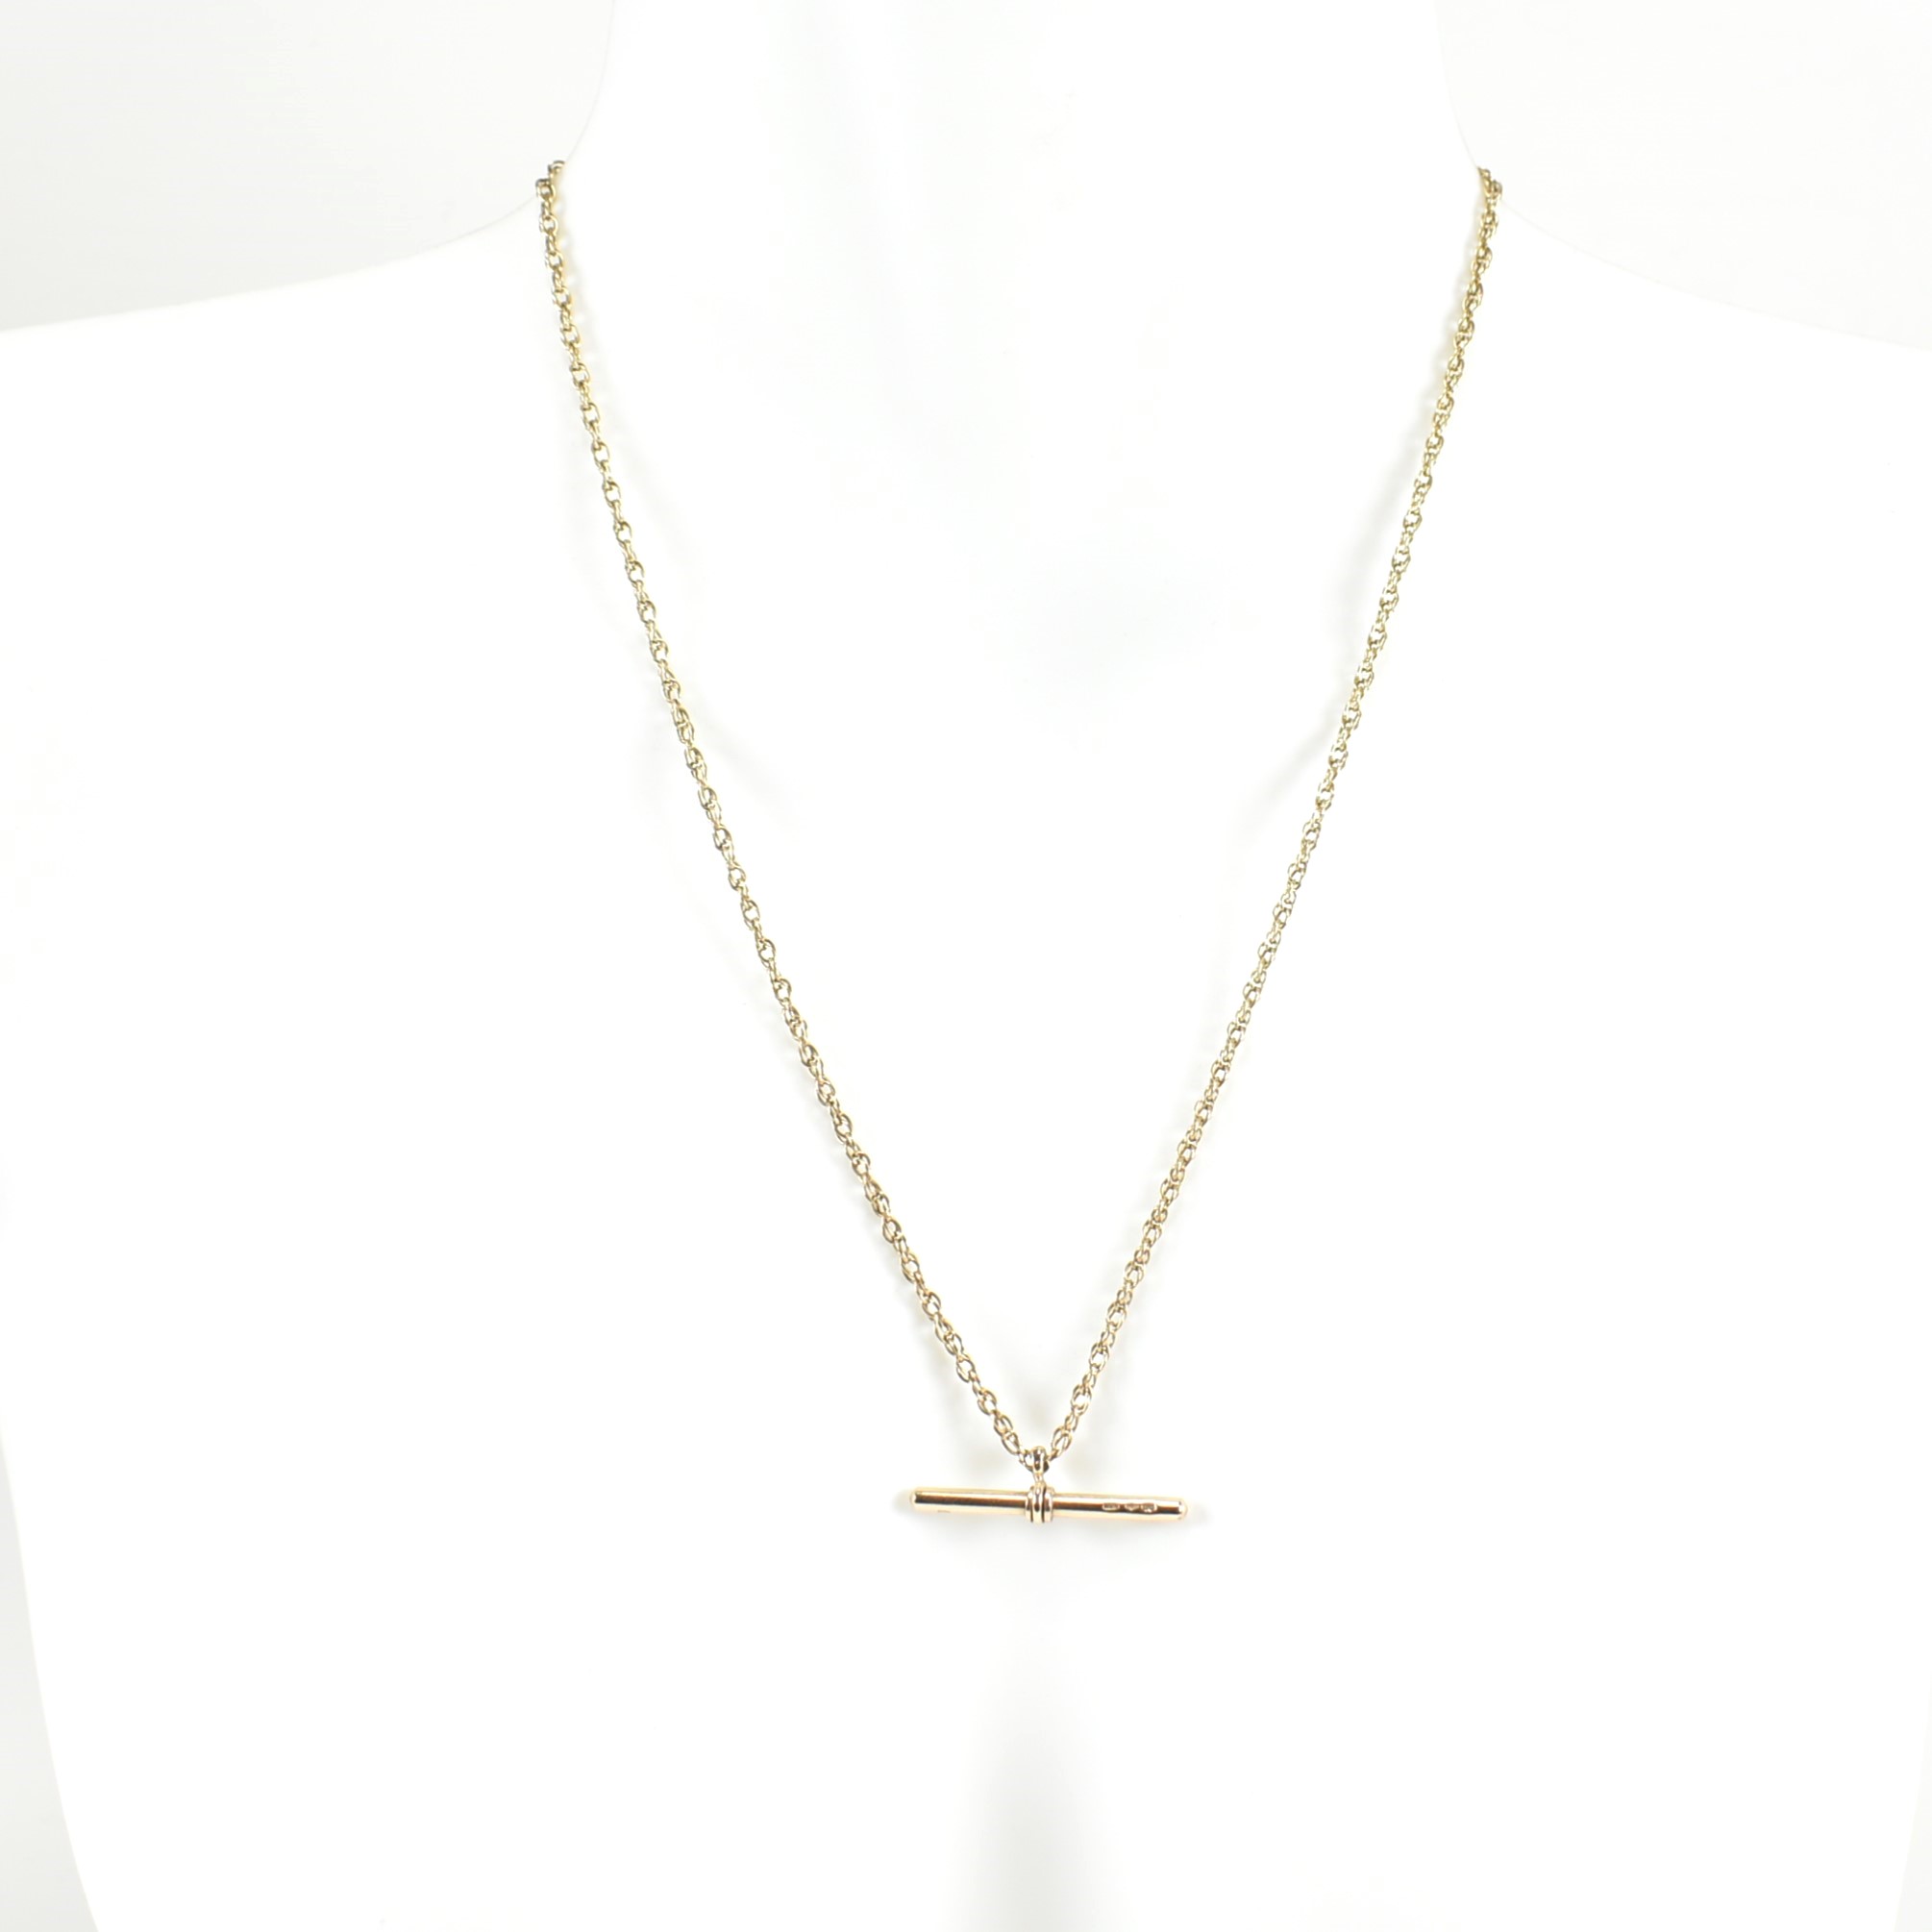 HALLMARKED 9CT GOLD T-BAR NECKLACE - Image 5 of 5